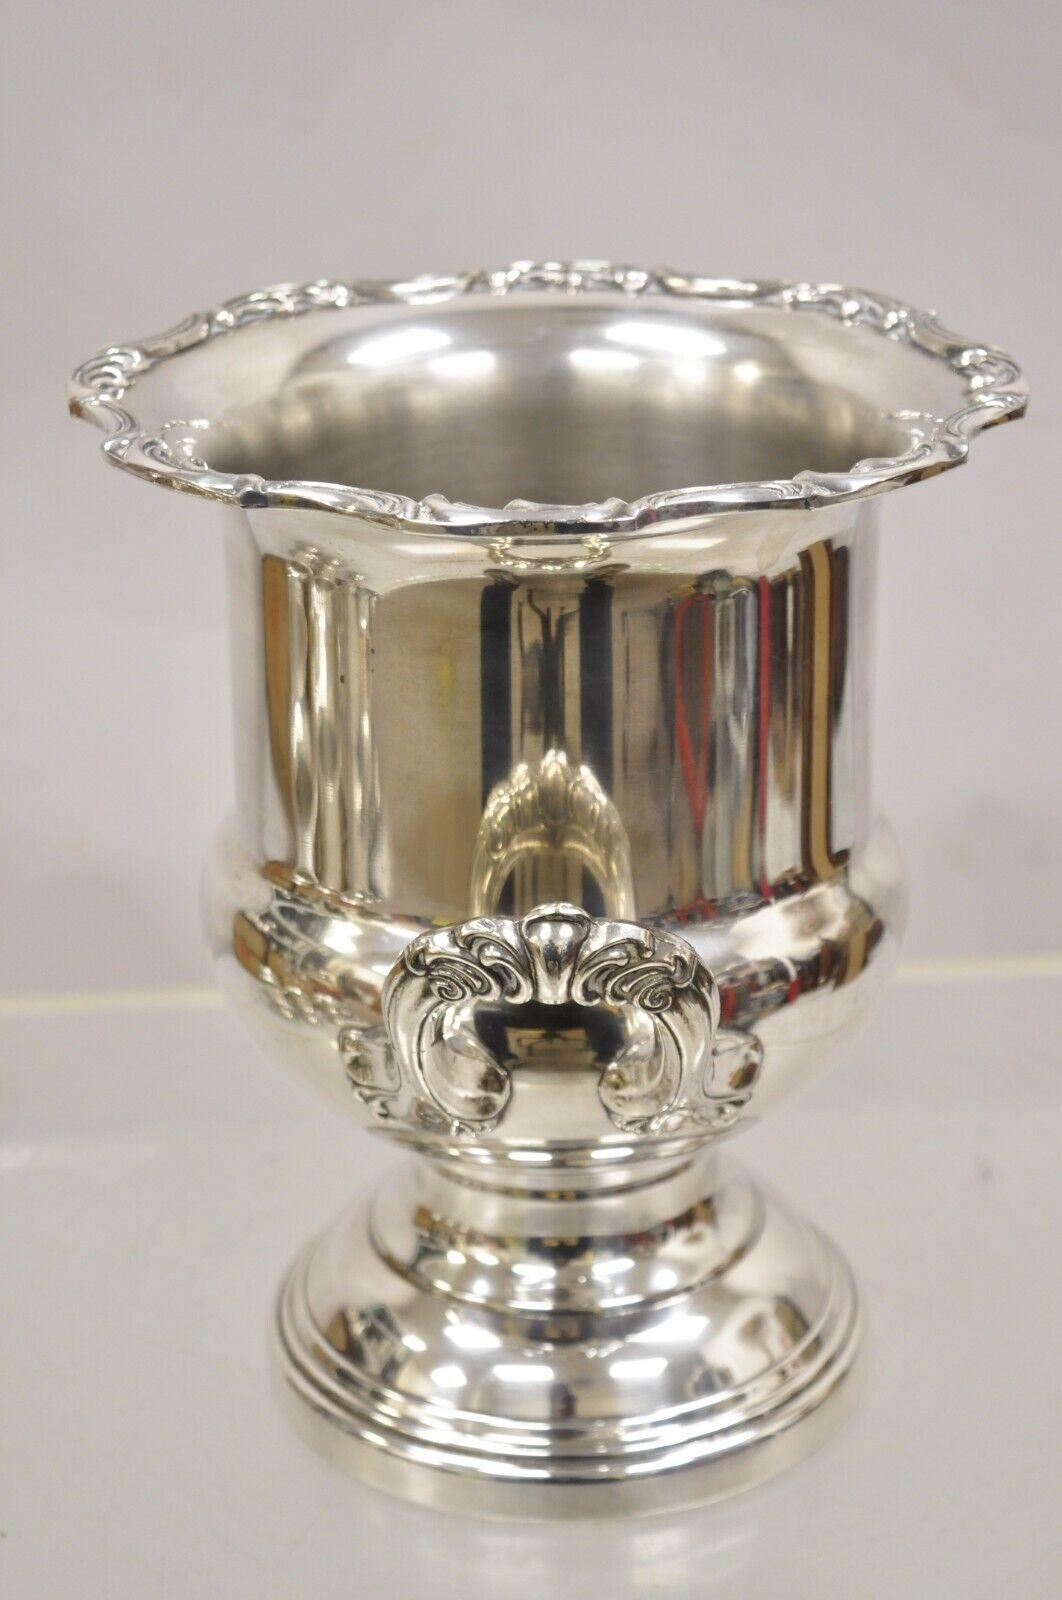 Vintage Leonard Silver Plated Trophy Cup Champagne Chiller Ice Bucket. Circa Mid to Late 20th Century. Measurements: 10